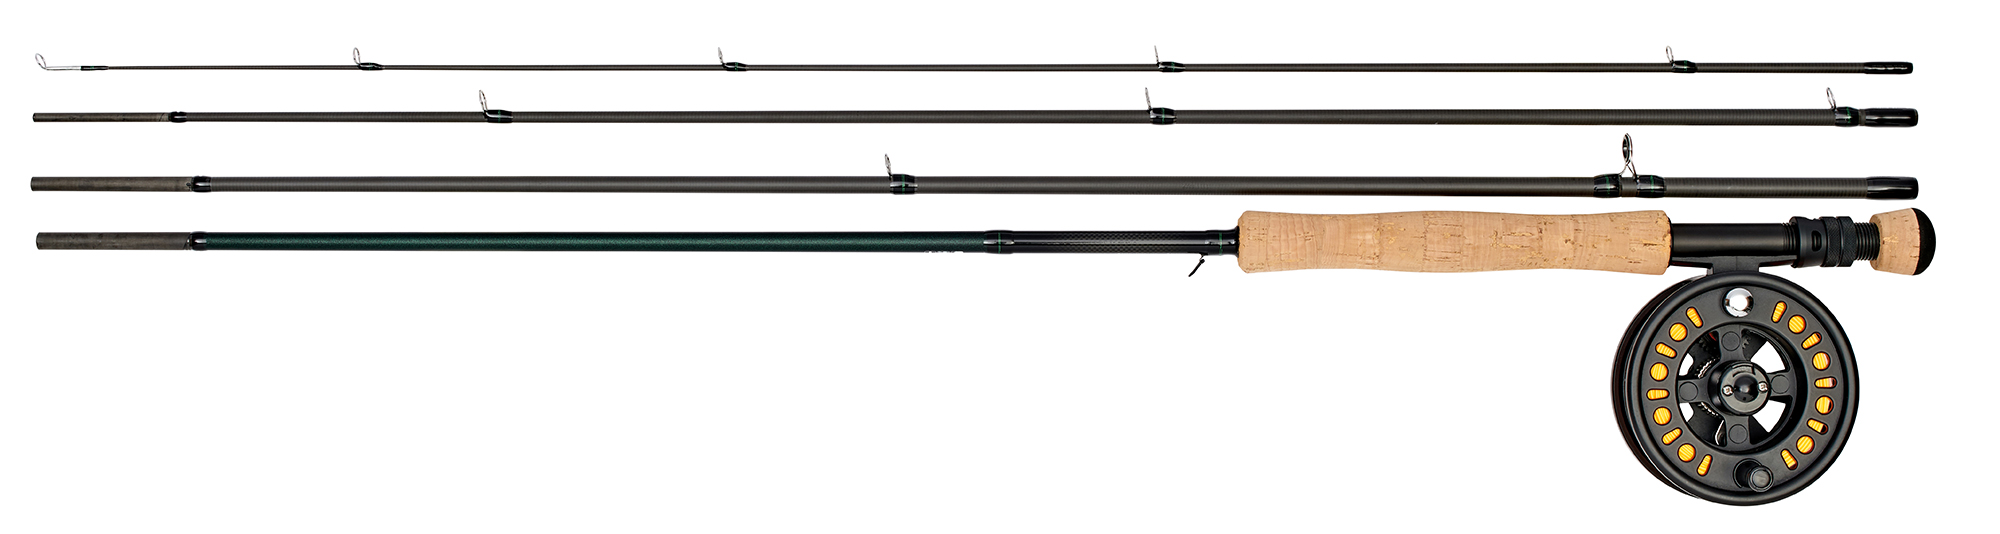 All Models Loaded with Line Rod/ Reel/ Tube New Daiwa S4 Fly Fishing Combo 